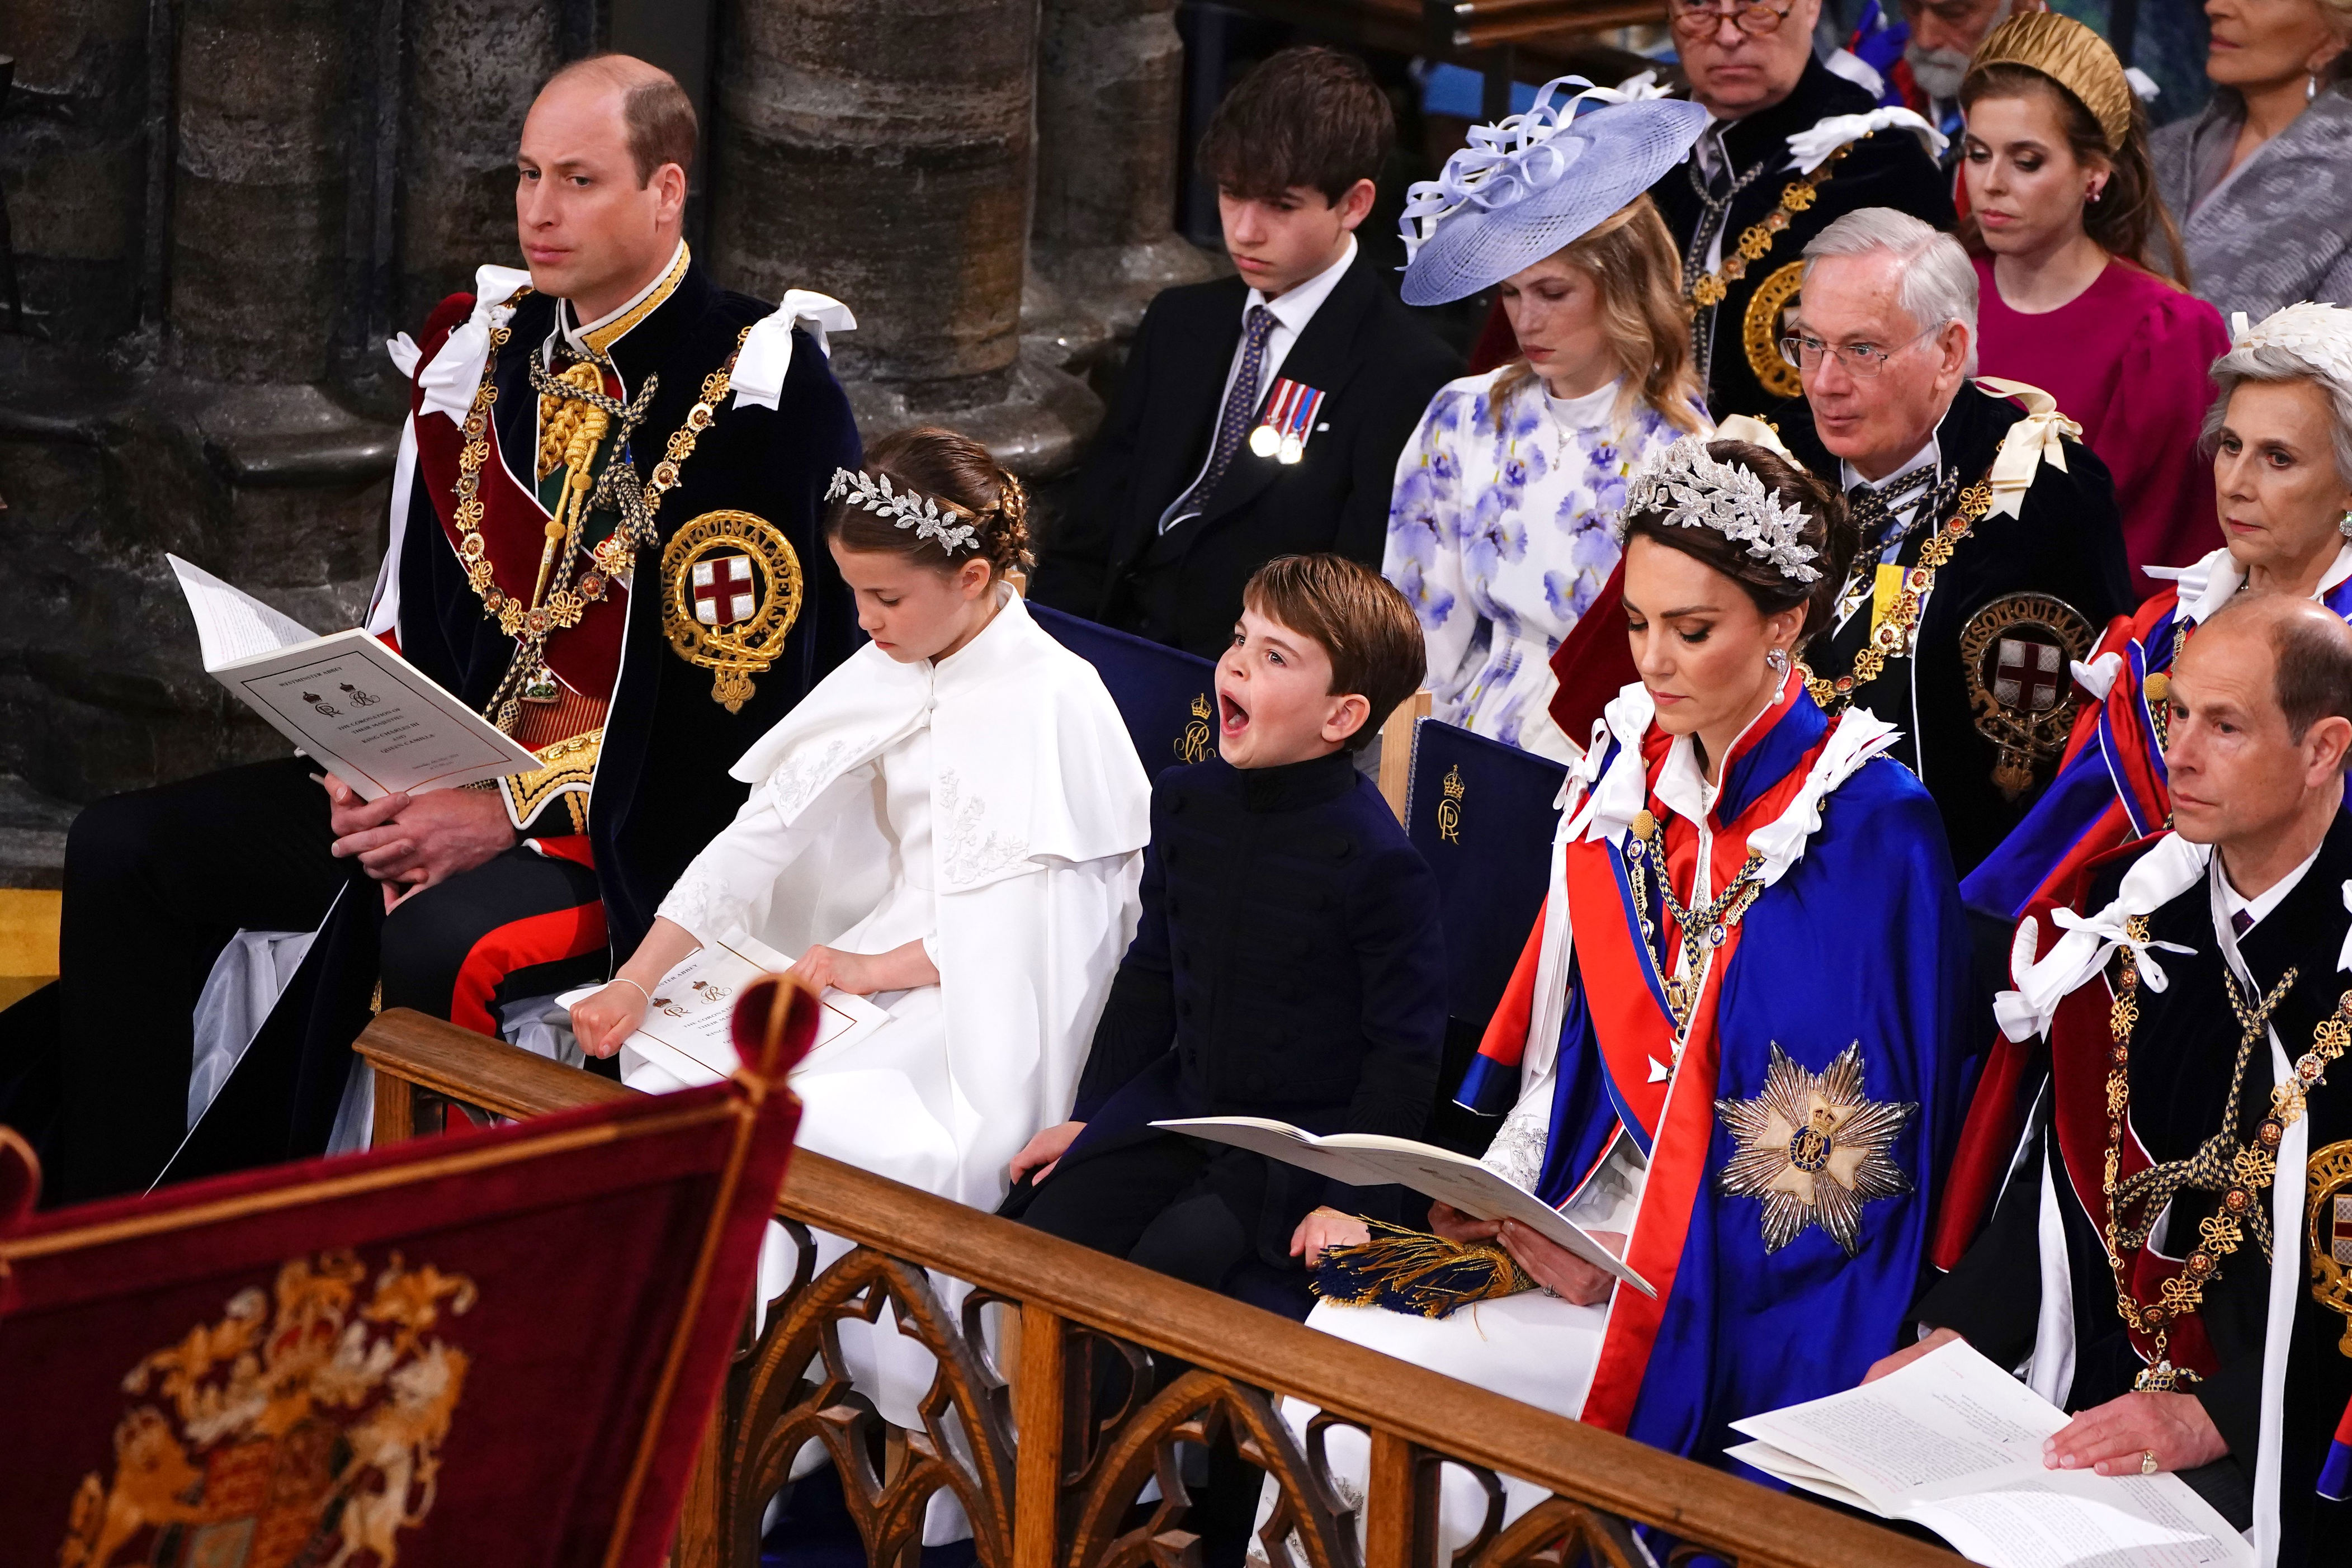 <p>Prince Louis yawned alongside sister Princess Charlotte while seated with parents Prince William and Princess Kate during <a href="https://www.wonderwall.com/celebrity/the-coronation-of-king-charles-iii-and-queen-camilla-the-best-pictures-of-all-the-royals-at-this-historic-event-735015.gallery">the coronation ceremony</a> of King Charles III and Queen Camilla in Westminster Abbey in London on May 6, 2023.</p>